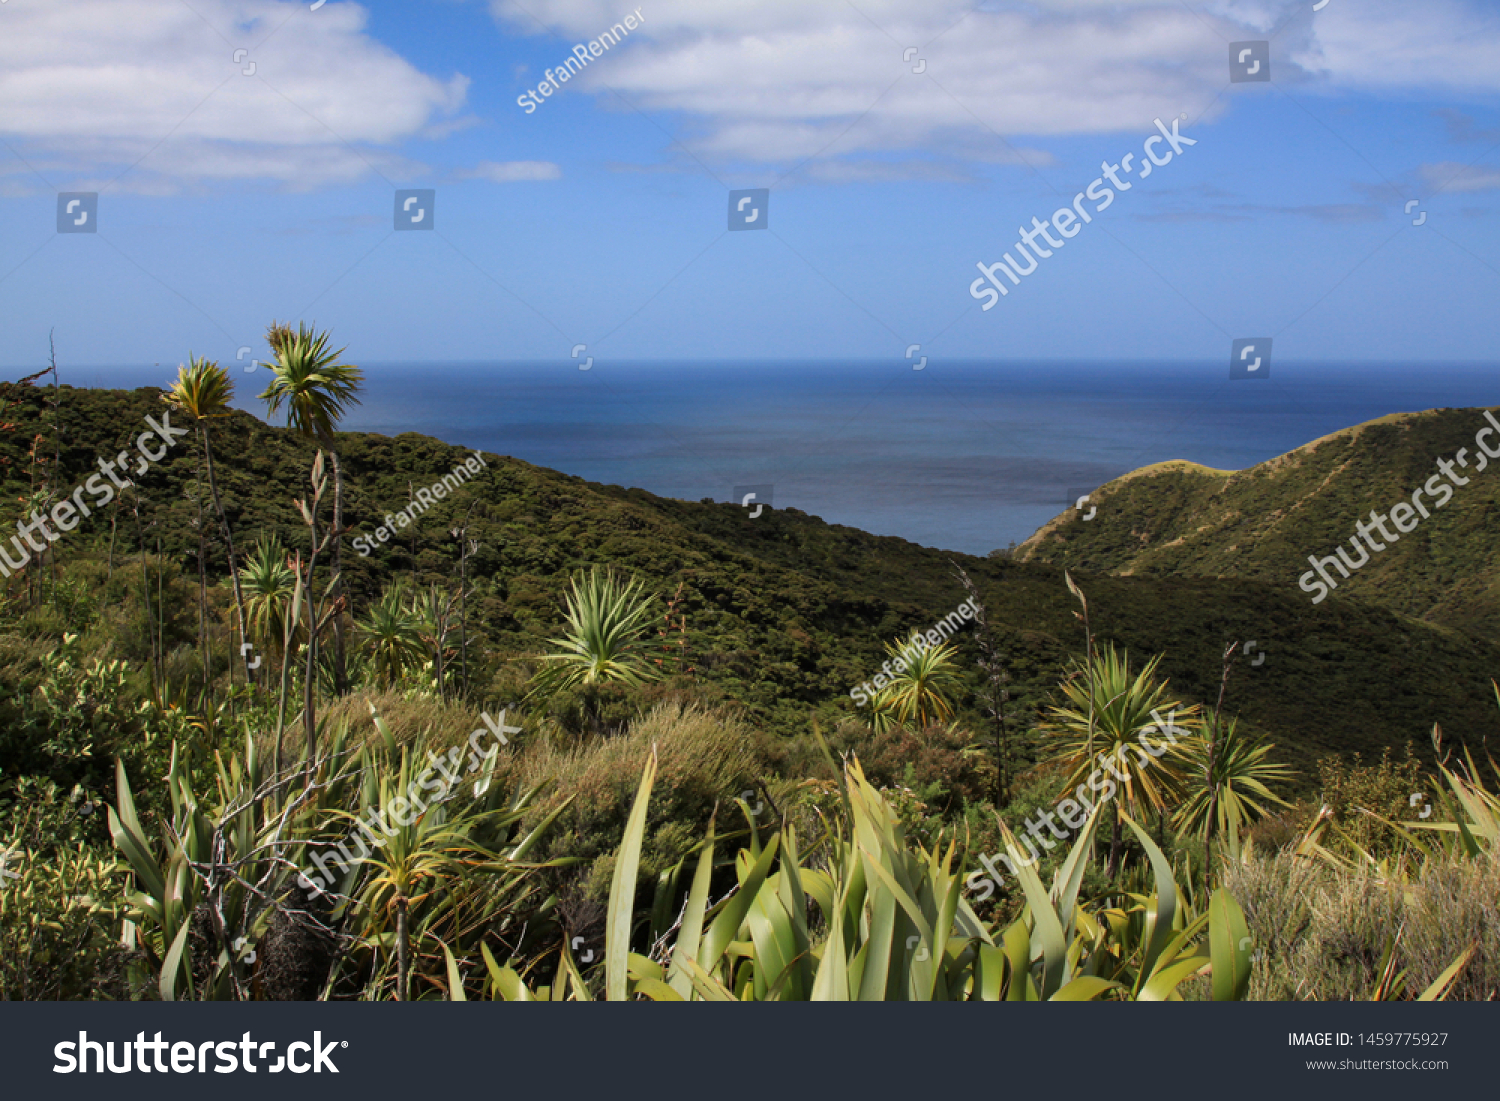 Wide panorama with vegetation of flora Flora with island character
 #1459775927